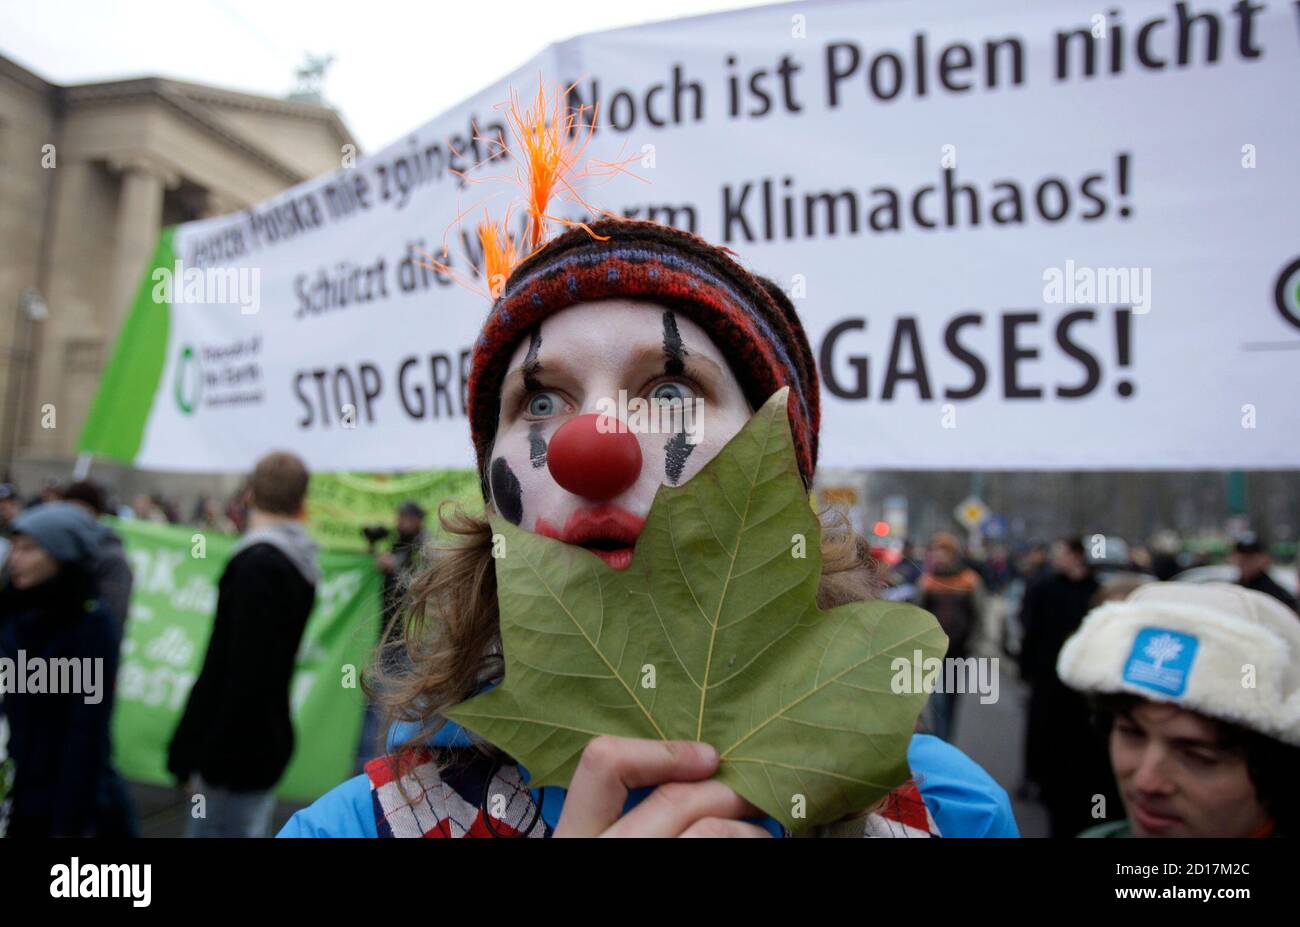 A protester dressed as a clown takes part in a demonstration in Poznan December 6, 2008. Around 1,000 people took to the streets on Saturday to demonstrate against climate policy next to the area where the U.N. climate talks are being held. French President Nicolas Sarkozy flies to Poland on Saturday to try to unblock Warsaw's opposition to new European climate goals, seeking a compromise likely to centre on coal concessions.      REUTERS/Tobias Schwarz     (POLAND) Stock Photo